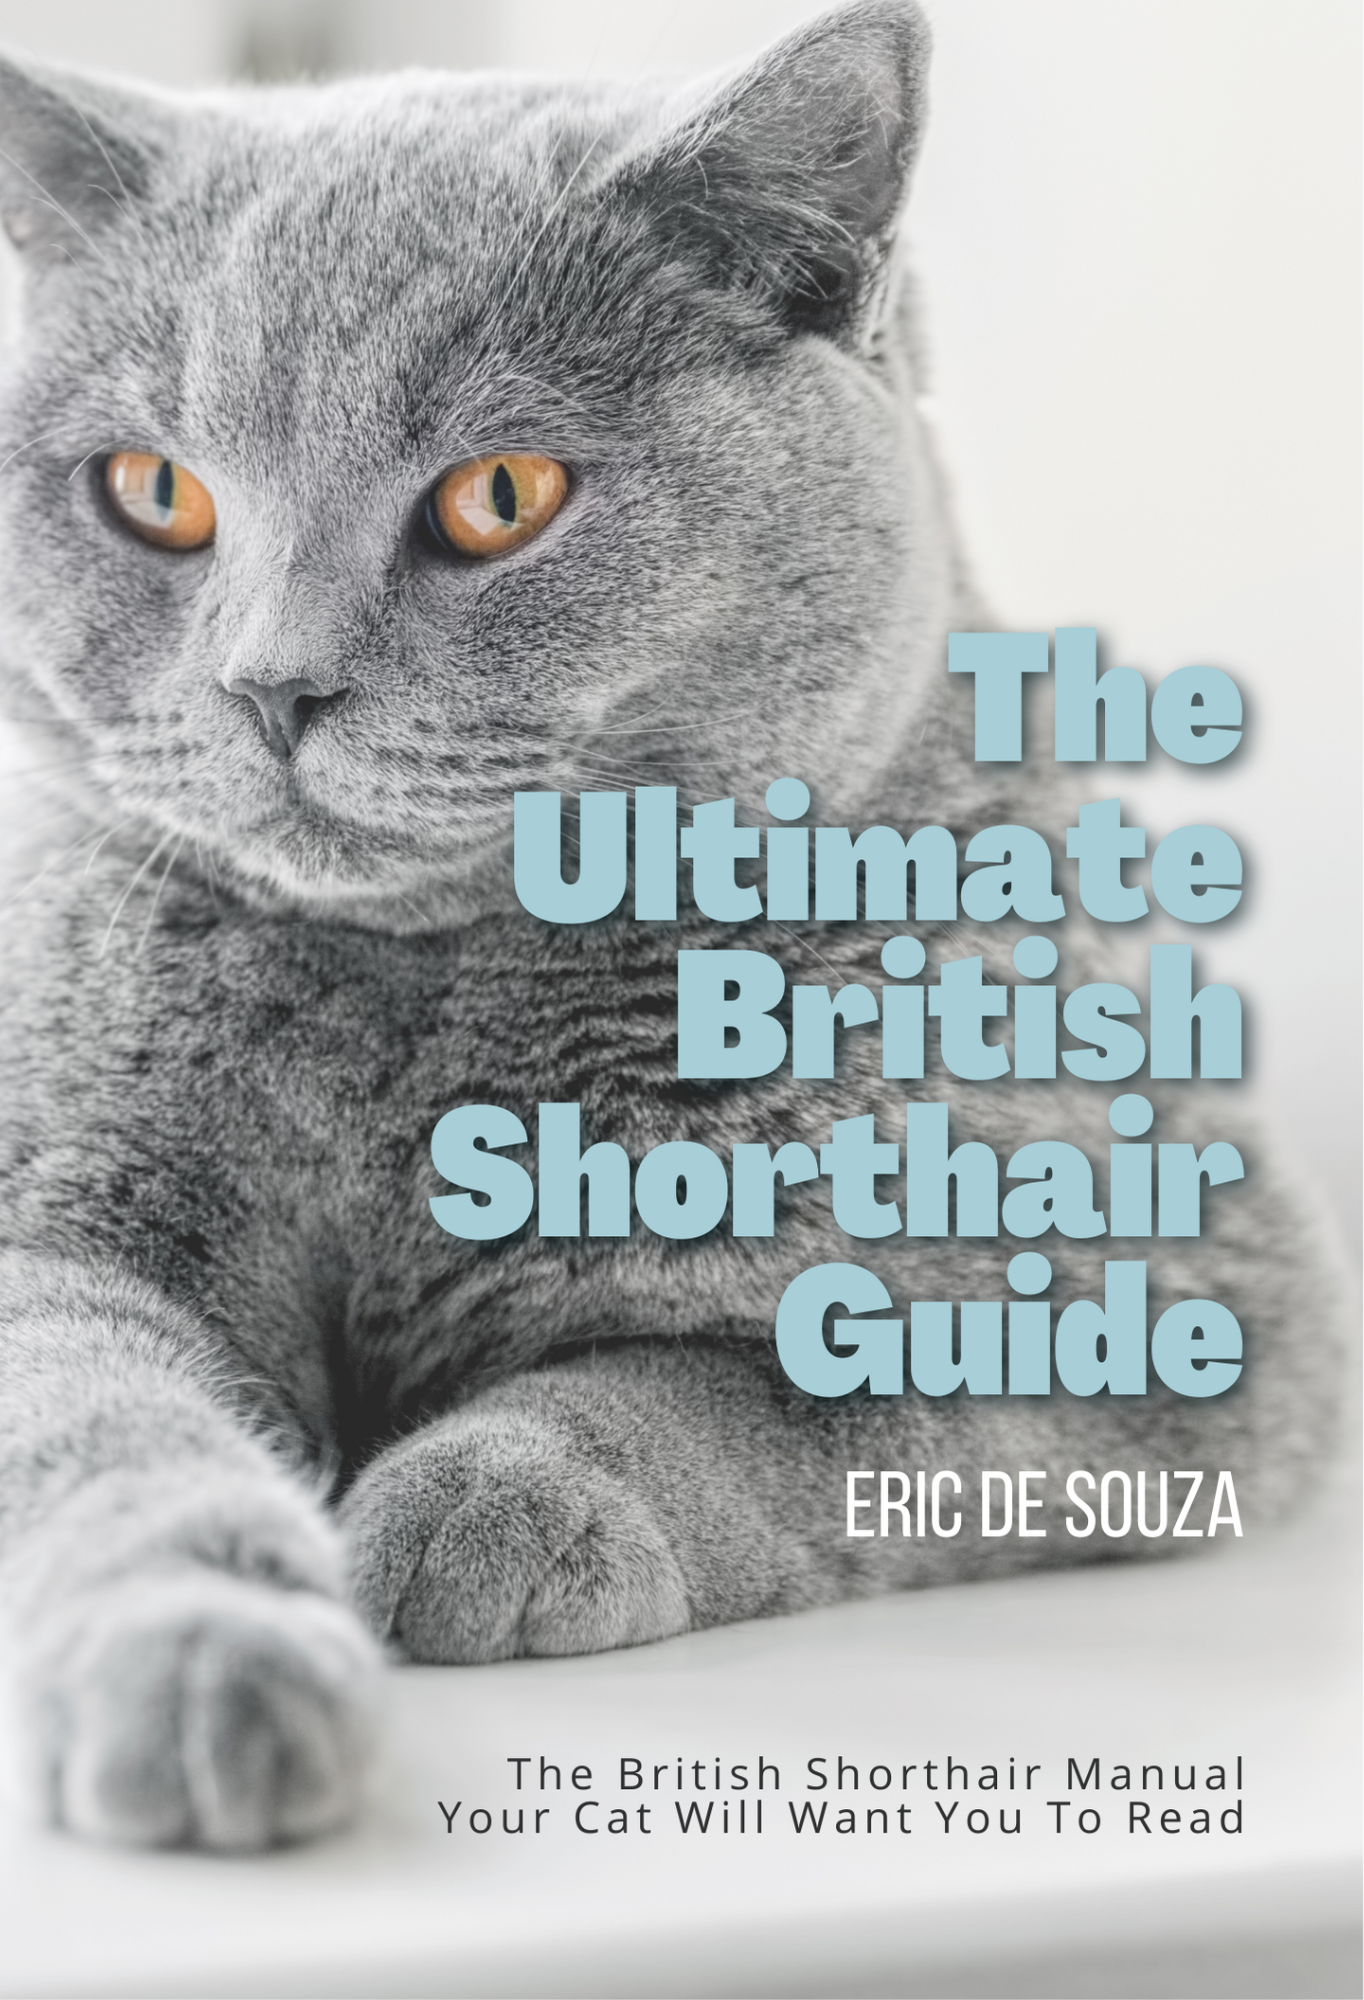 Buy The Ultimate British Shorthair Guide